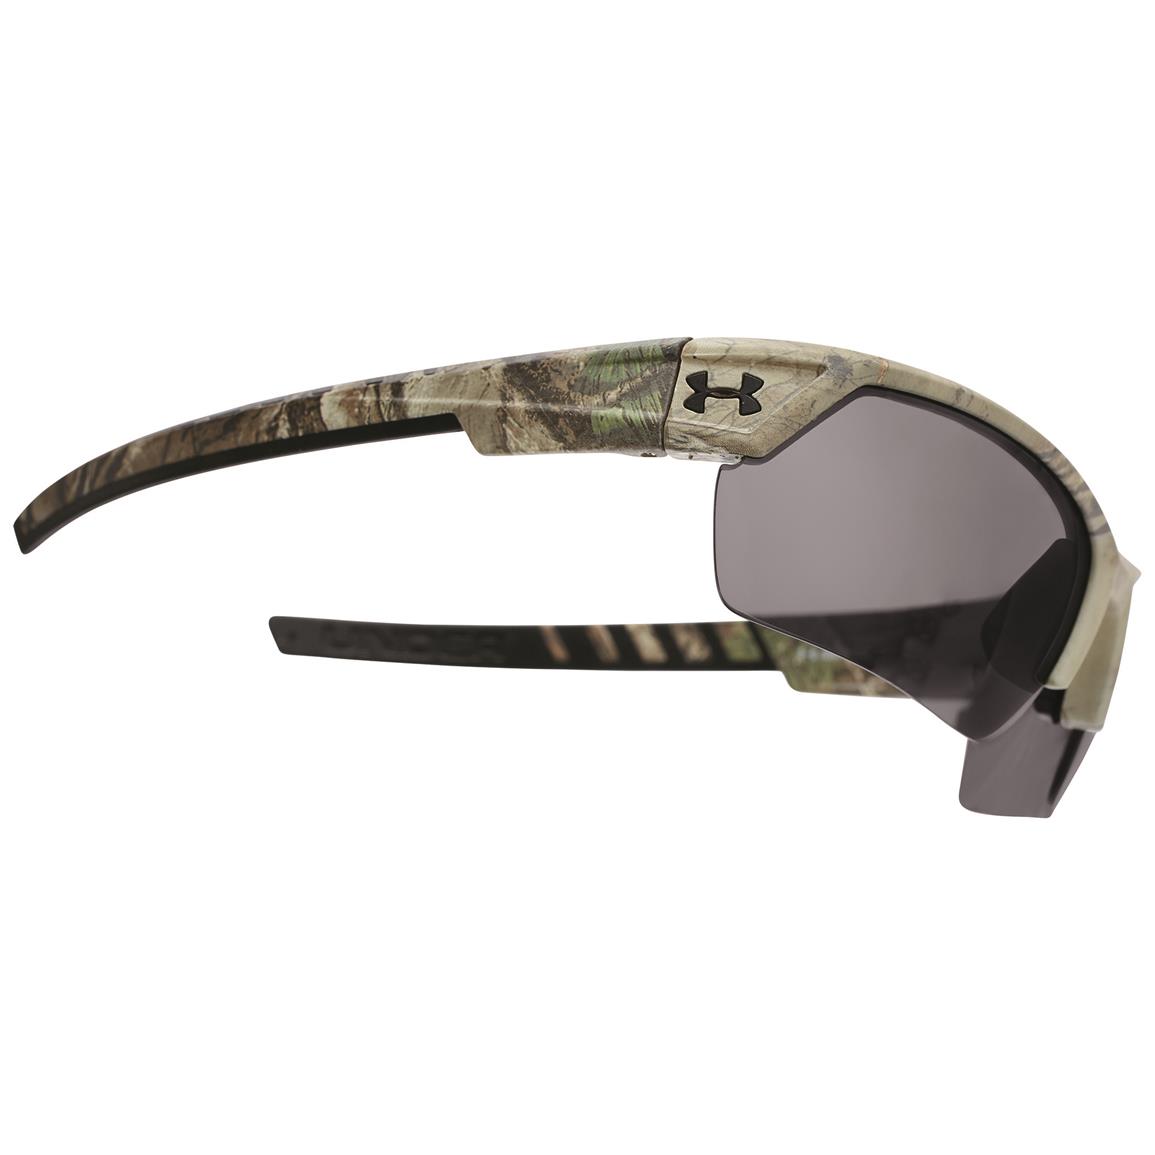 under armour replacement lenses